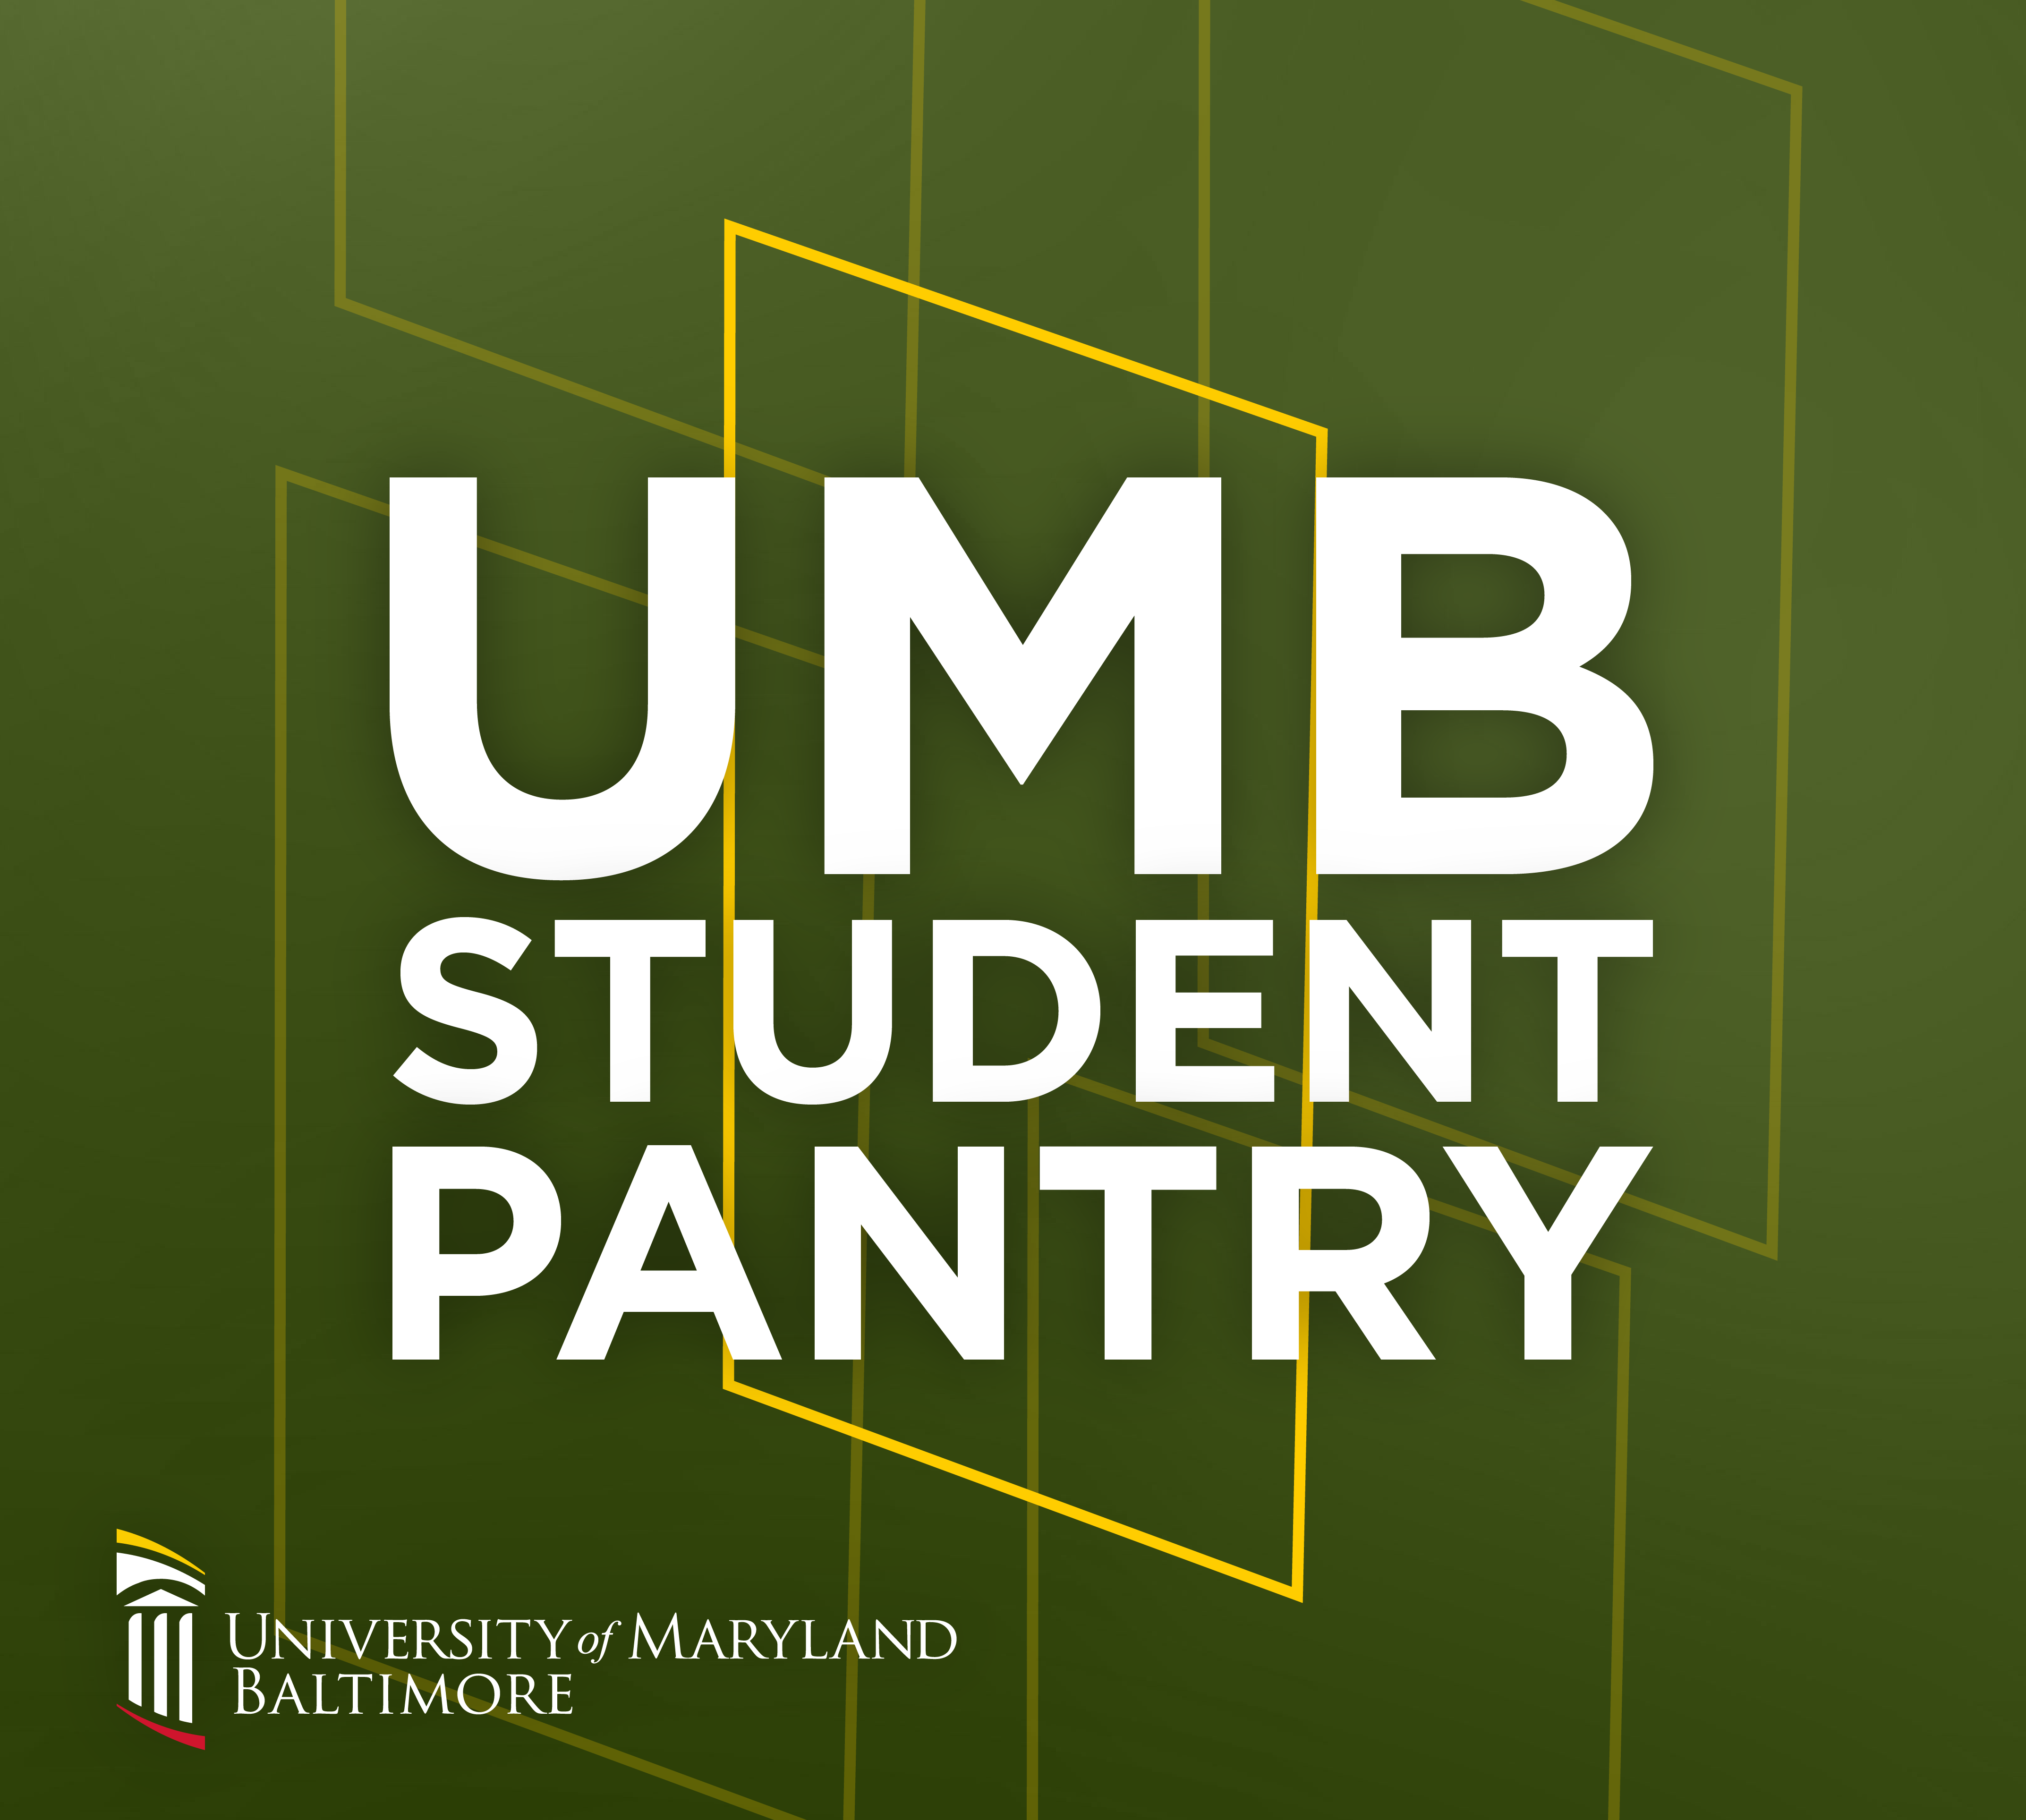 Image has on it UMB Student Pantry